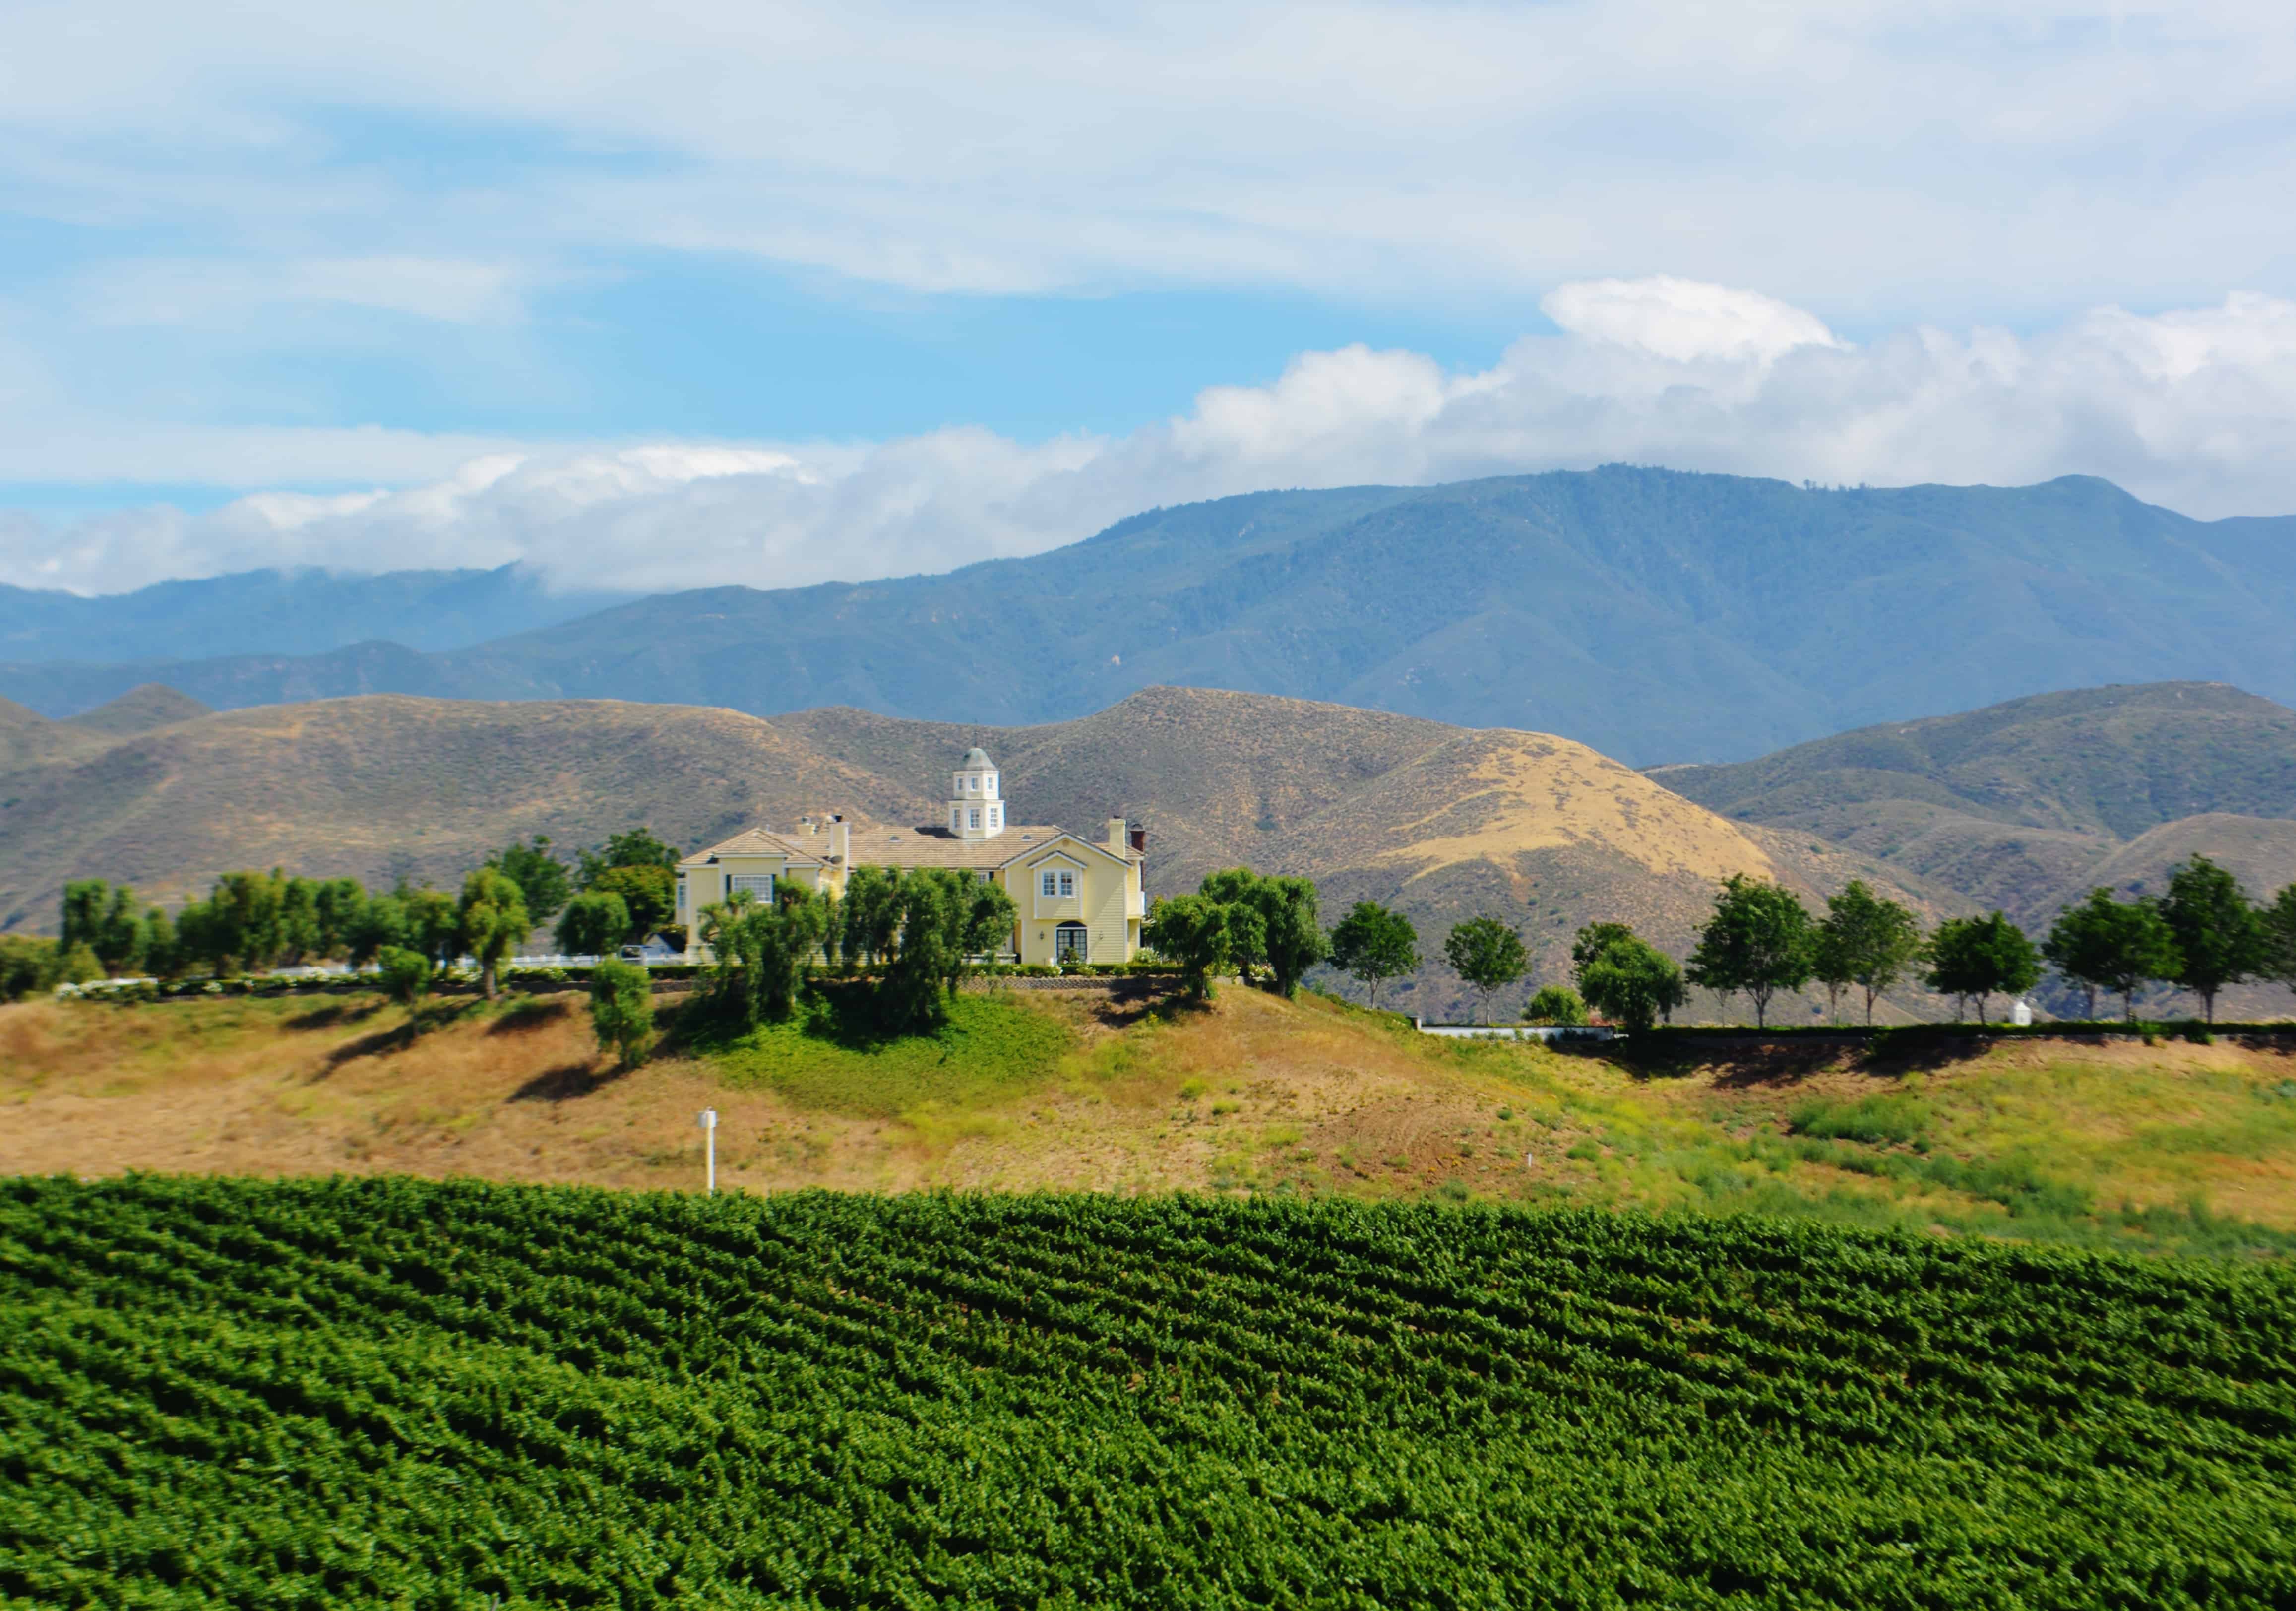 Winery and Mountain Views in Temecula California